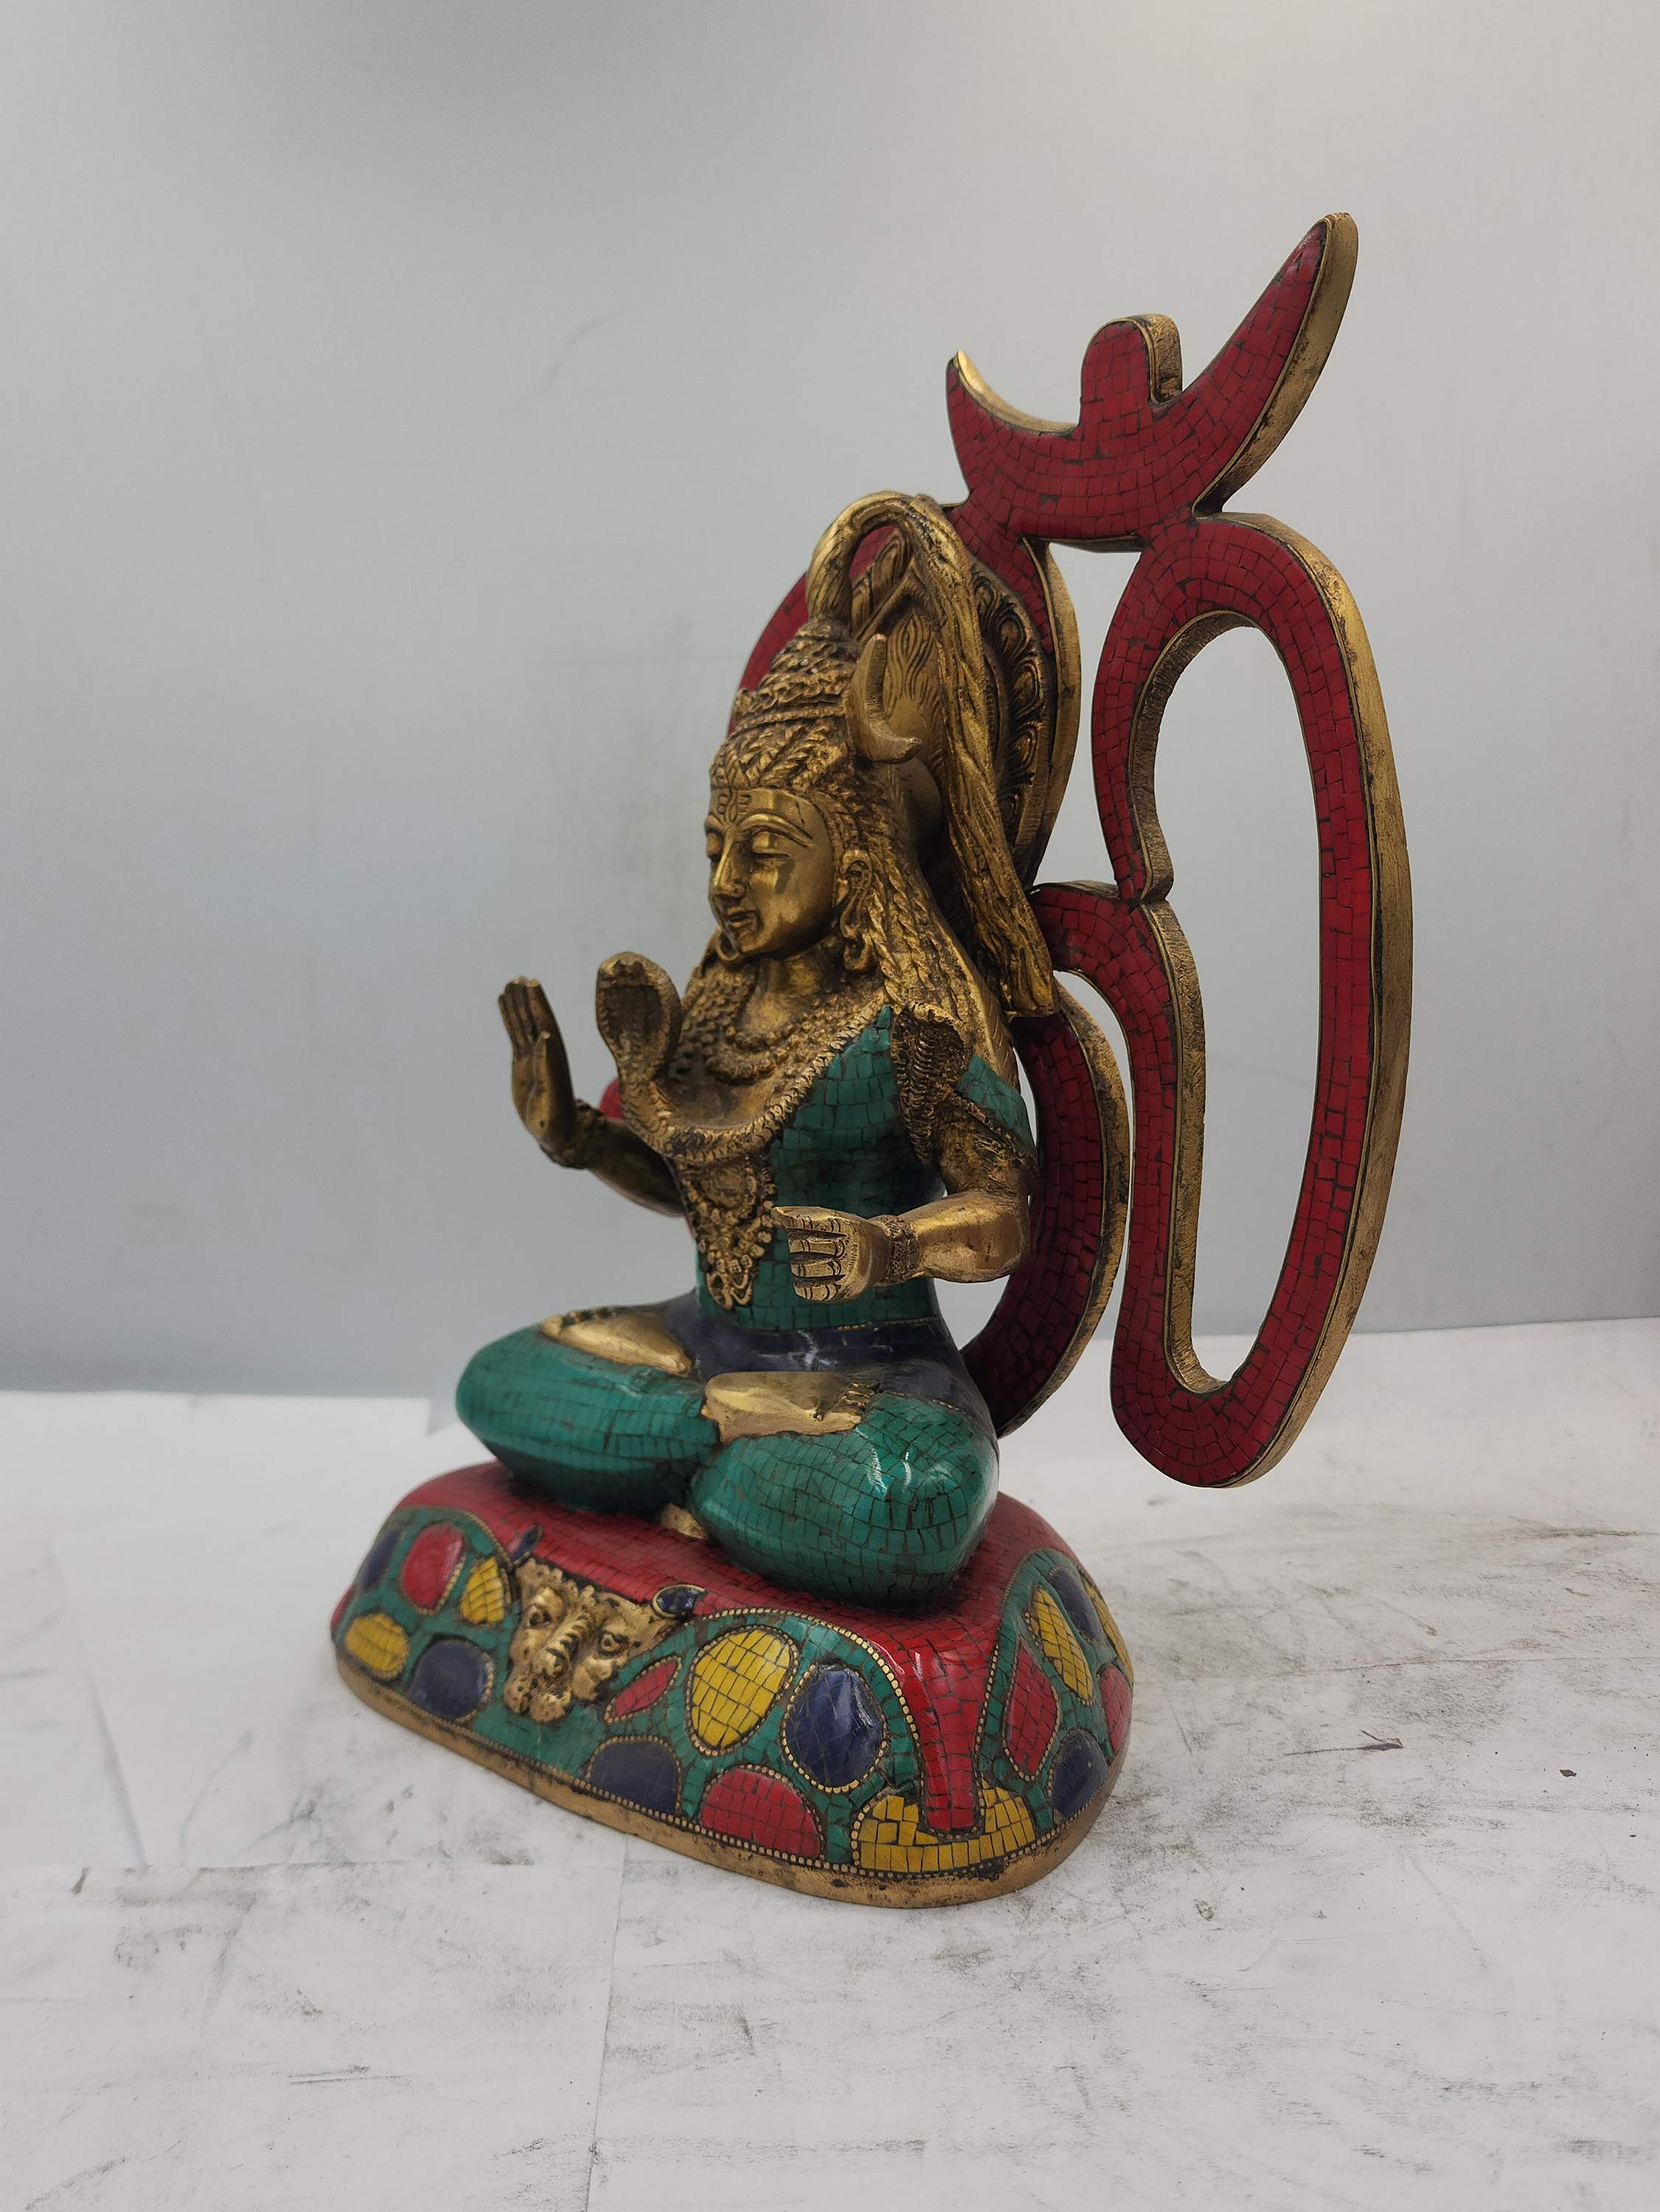 Nepali Statue Of Shiva Or Mahadev, With Om In Back Ground sand Casting, Stone Setting